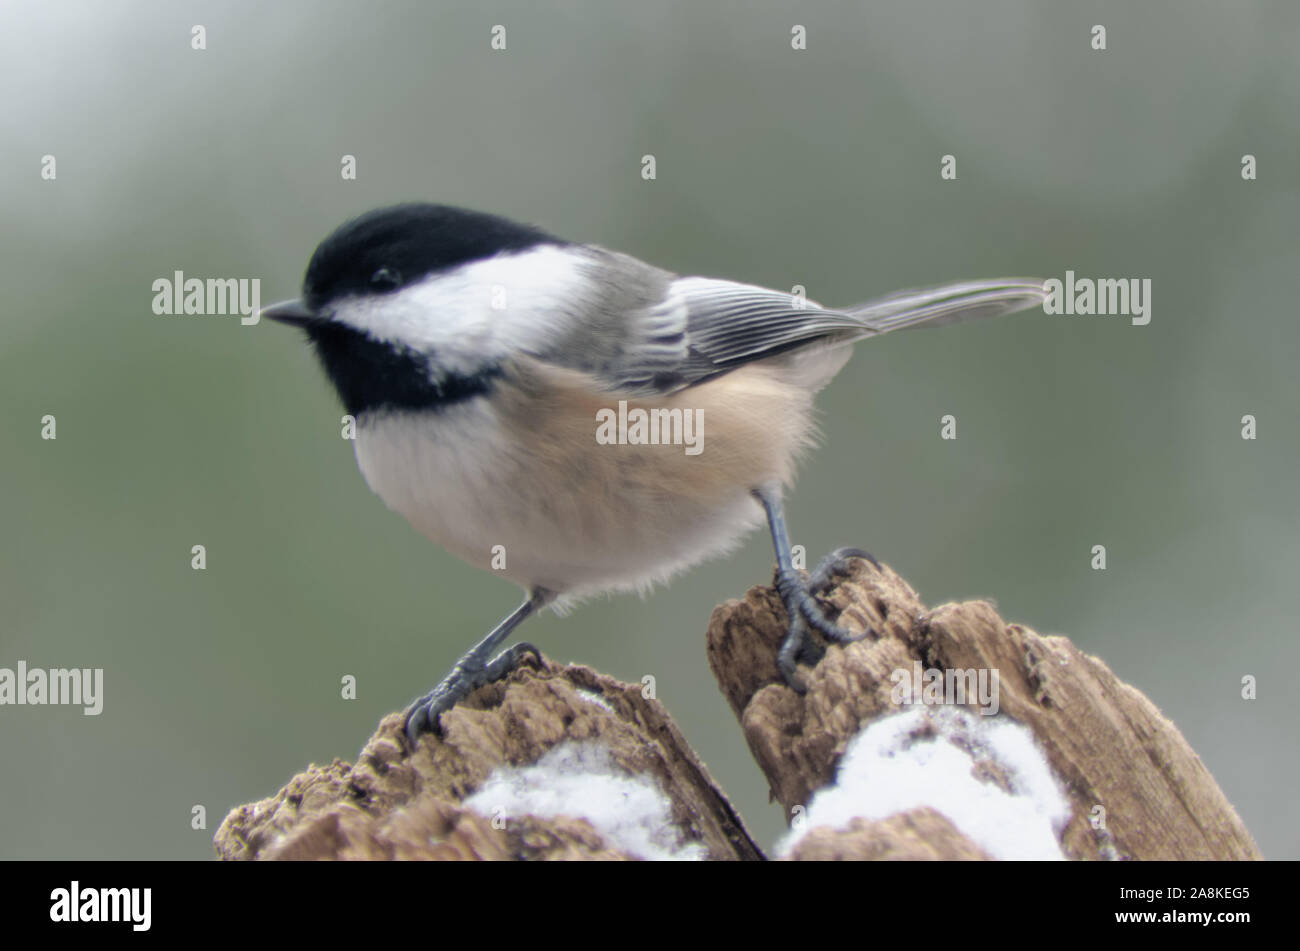 Black-capped Chickadee (Poecile atricapillus) in Winter standing on a stump Stock Photo